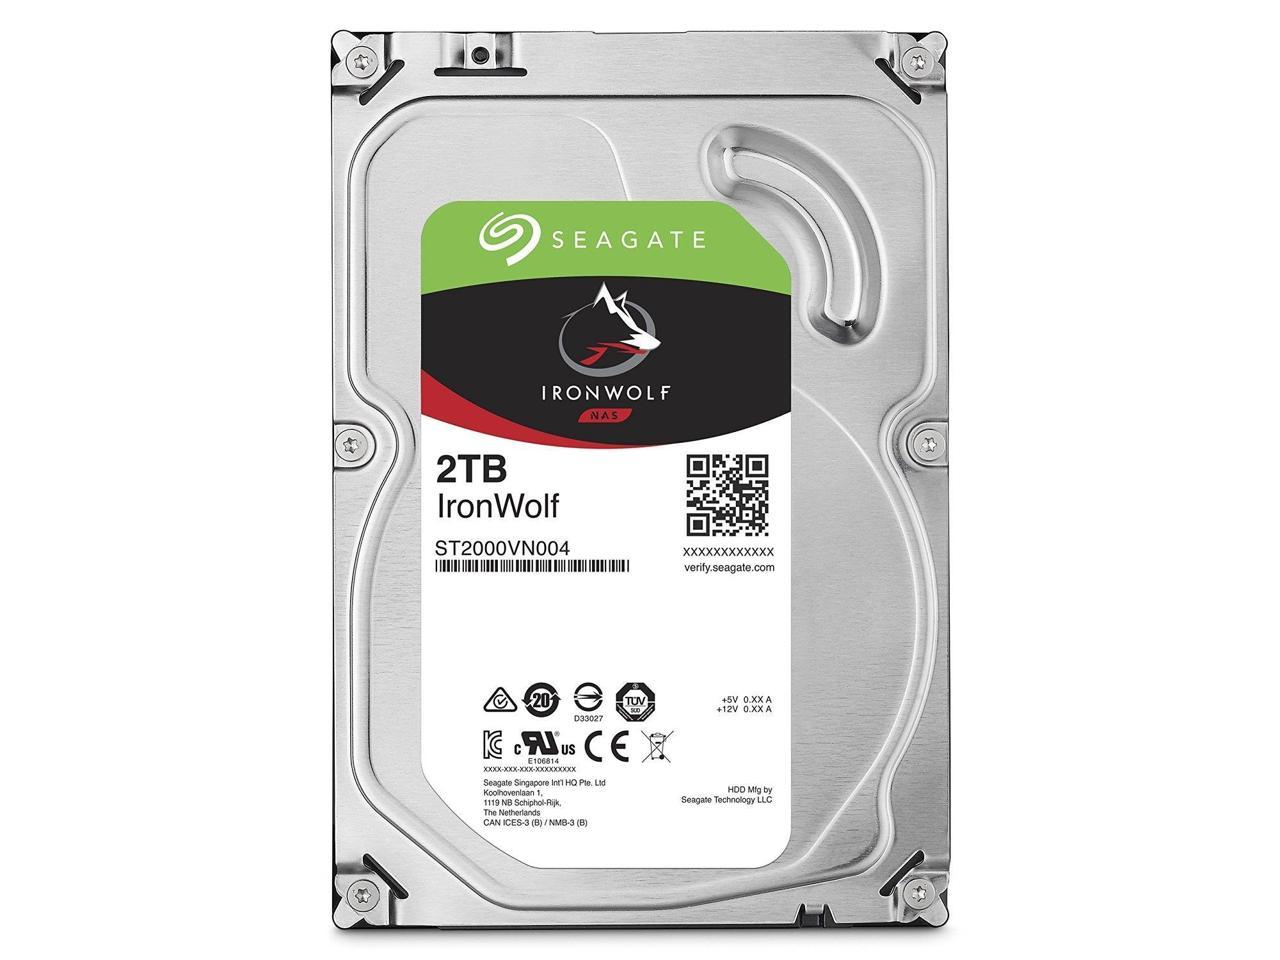 Seagate IronWolf 2TB 3.5" SATA III Internal HDD - ST2000VN004 Reconditioned